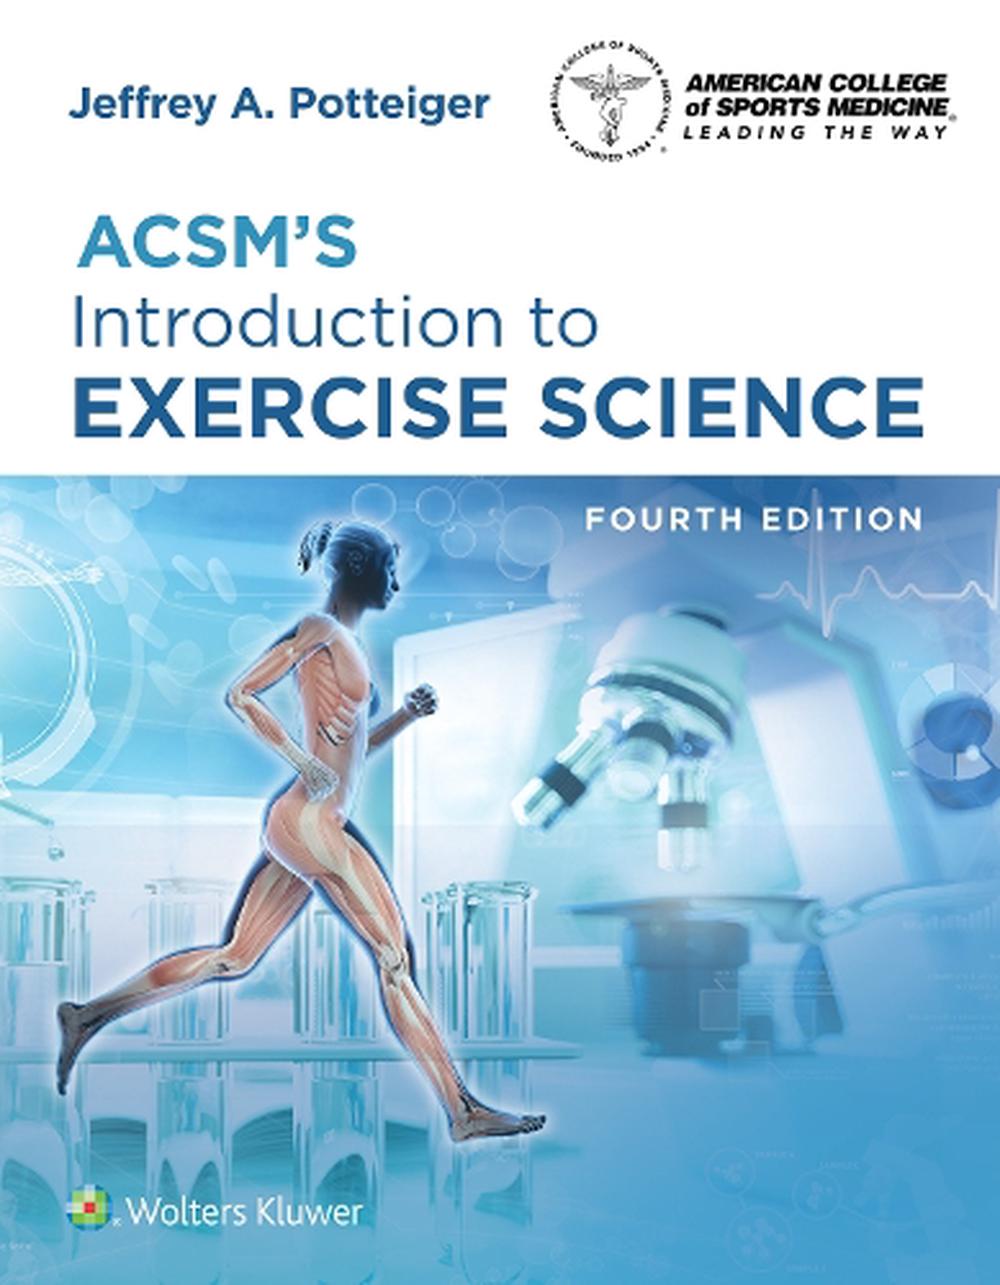 research topics related to exercise science